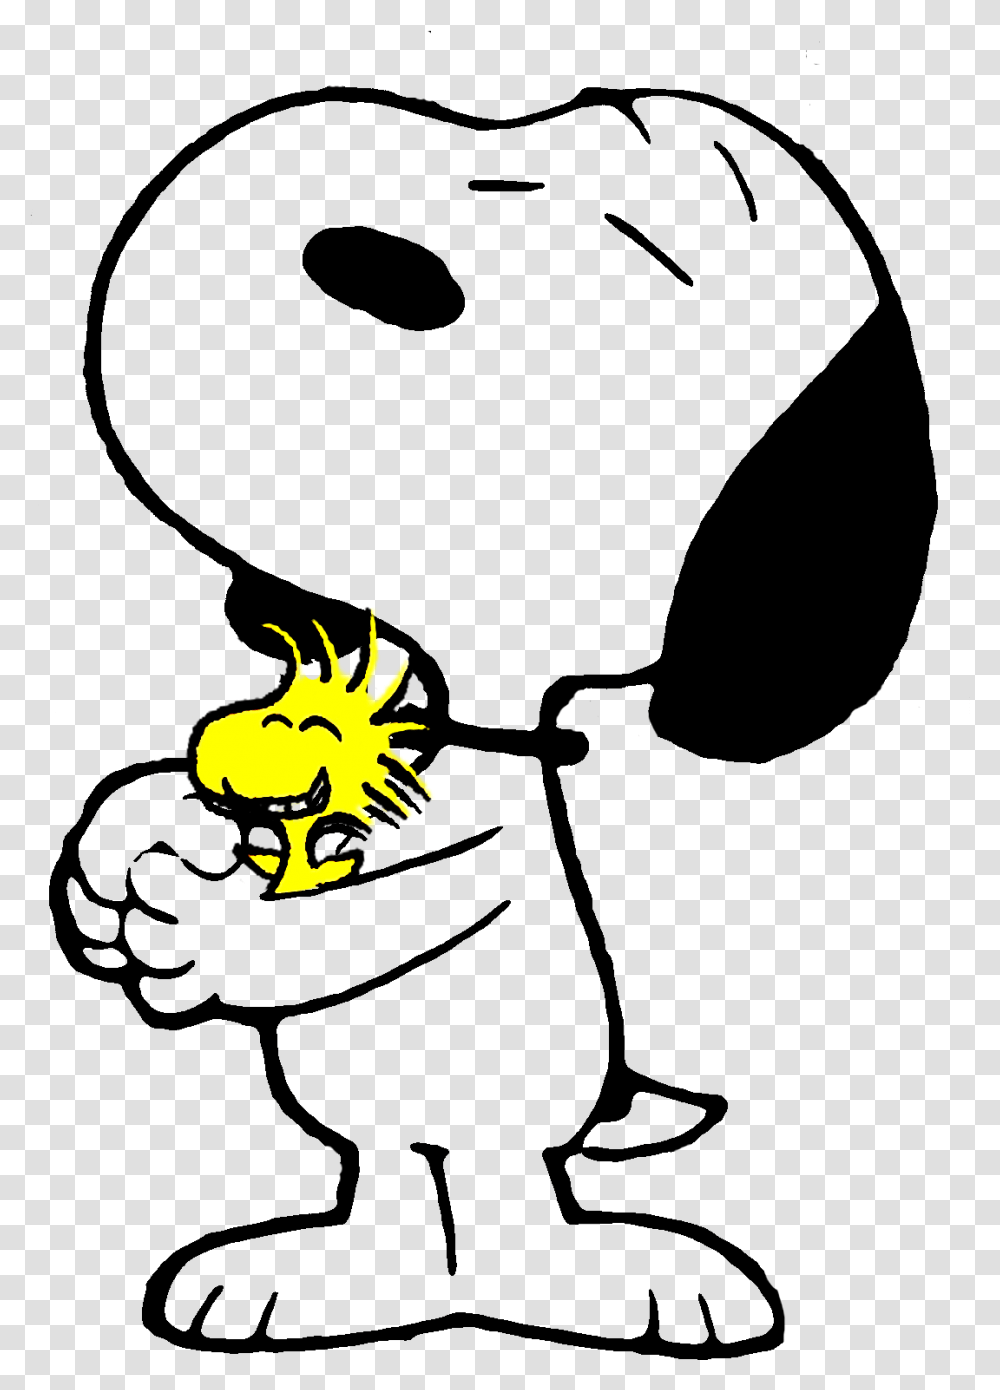 Snoopy Hugging His Friend By Bradsnoopy On, Dragon, Bonfire, Flame, Nature Transparent Png